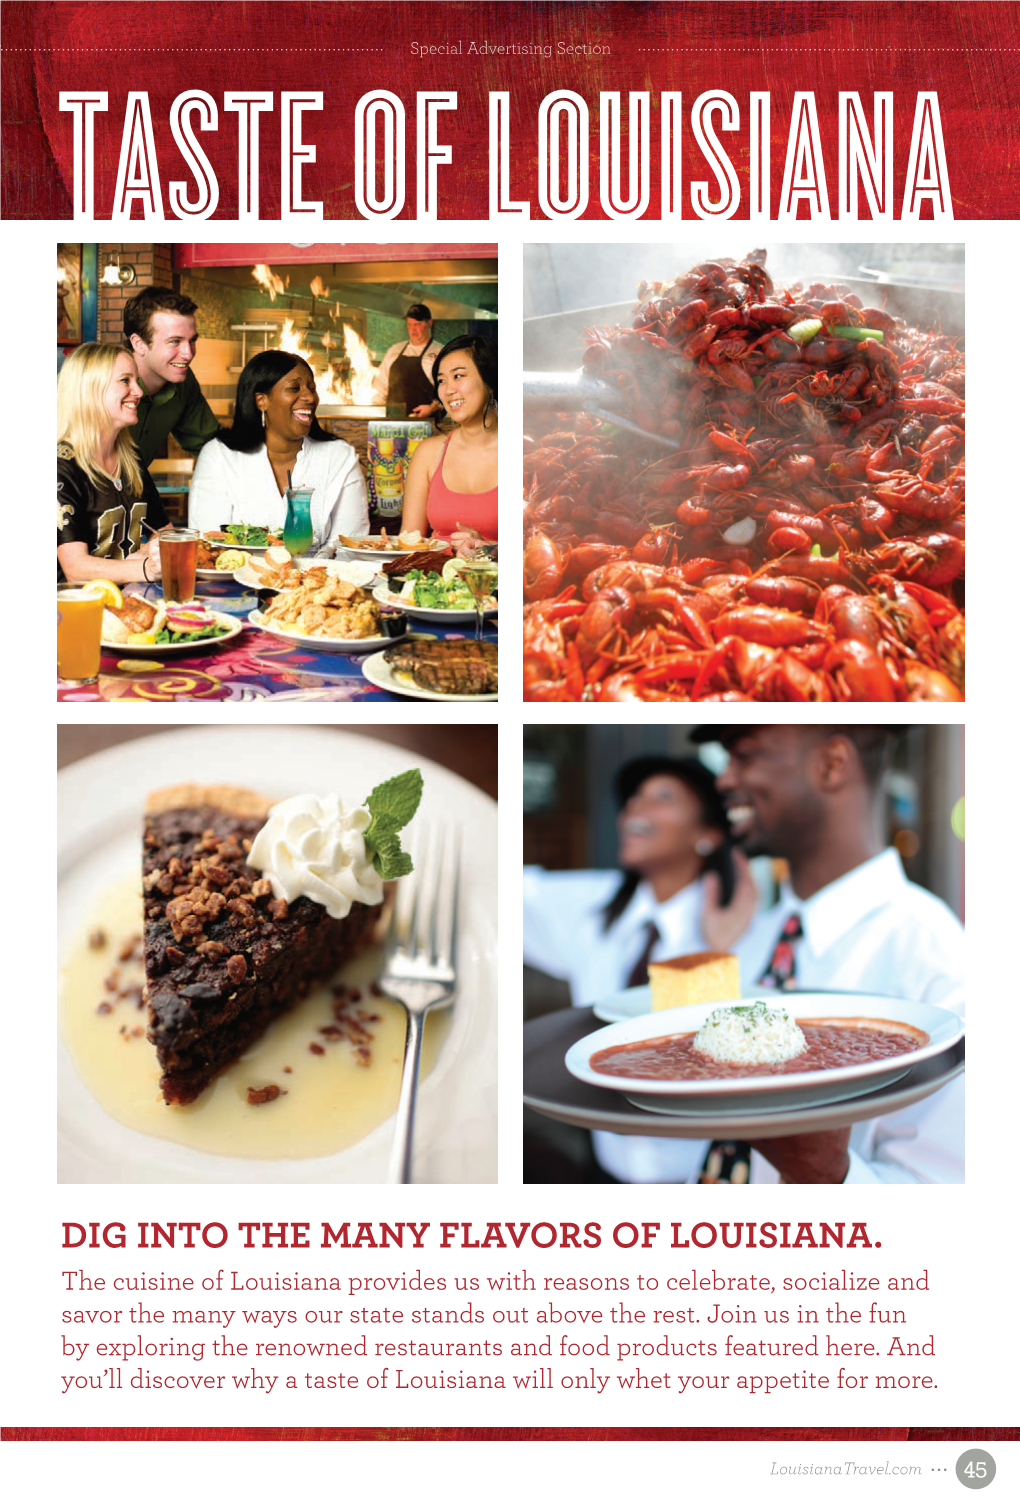 Dig Into the Many Flavors of Louisiana